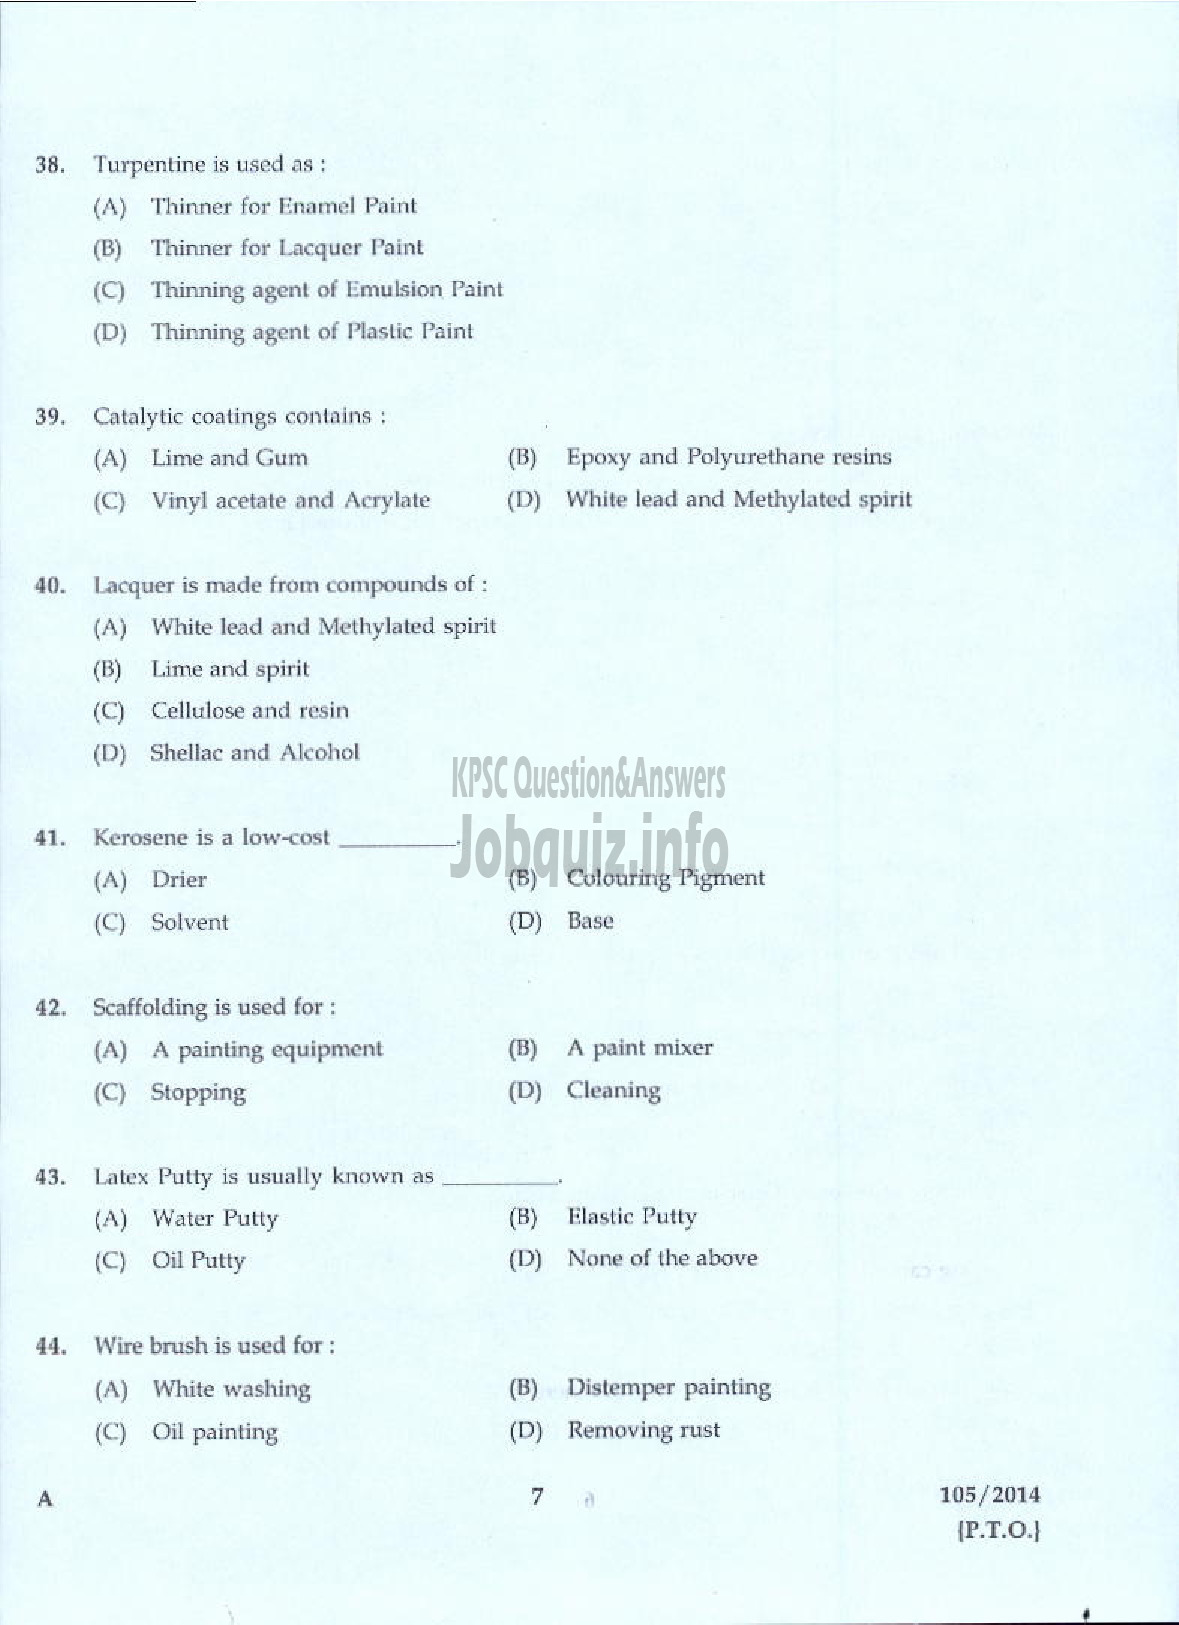 Kerala PSC Question Paper - PAINTER KERALA AGRO MACHINERY CORPORATION LIMITED-5